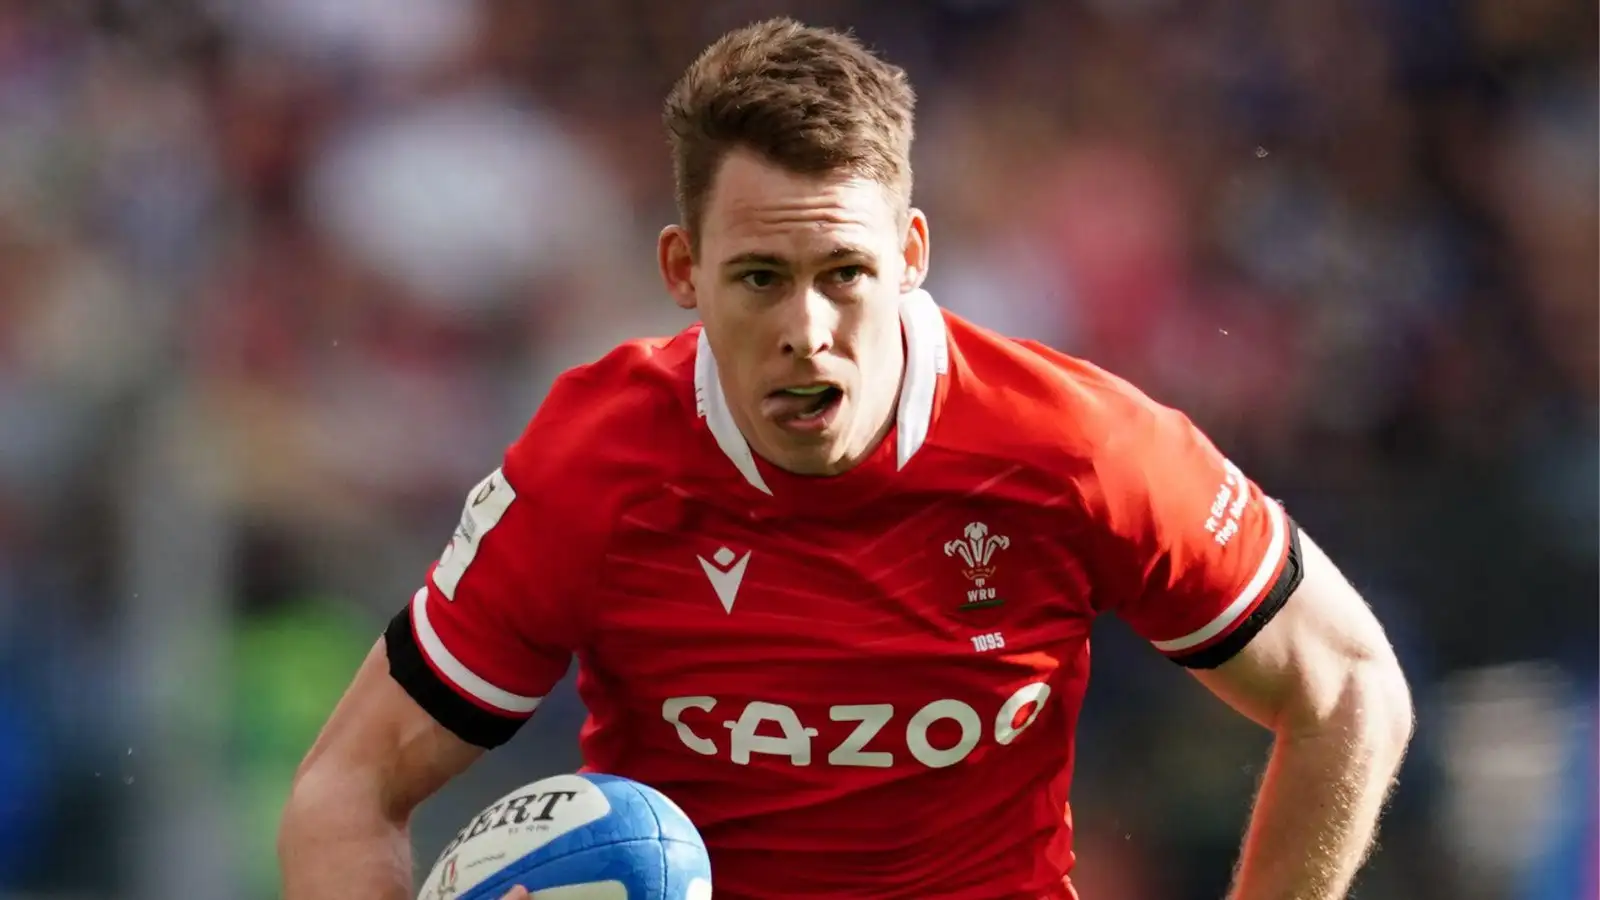 Wales: Fullback Liam Williams ruled out of Six Nations clash against France through injury